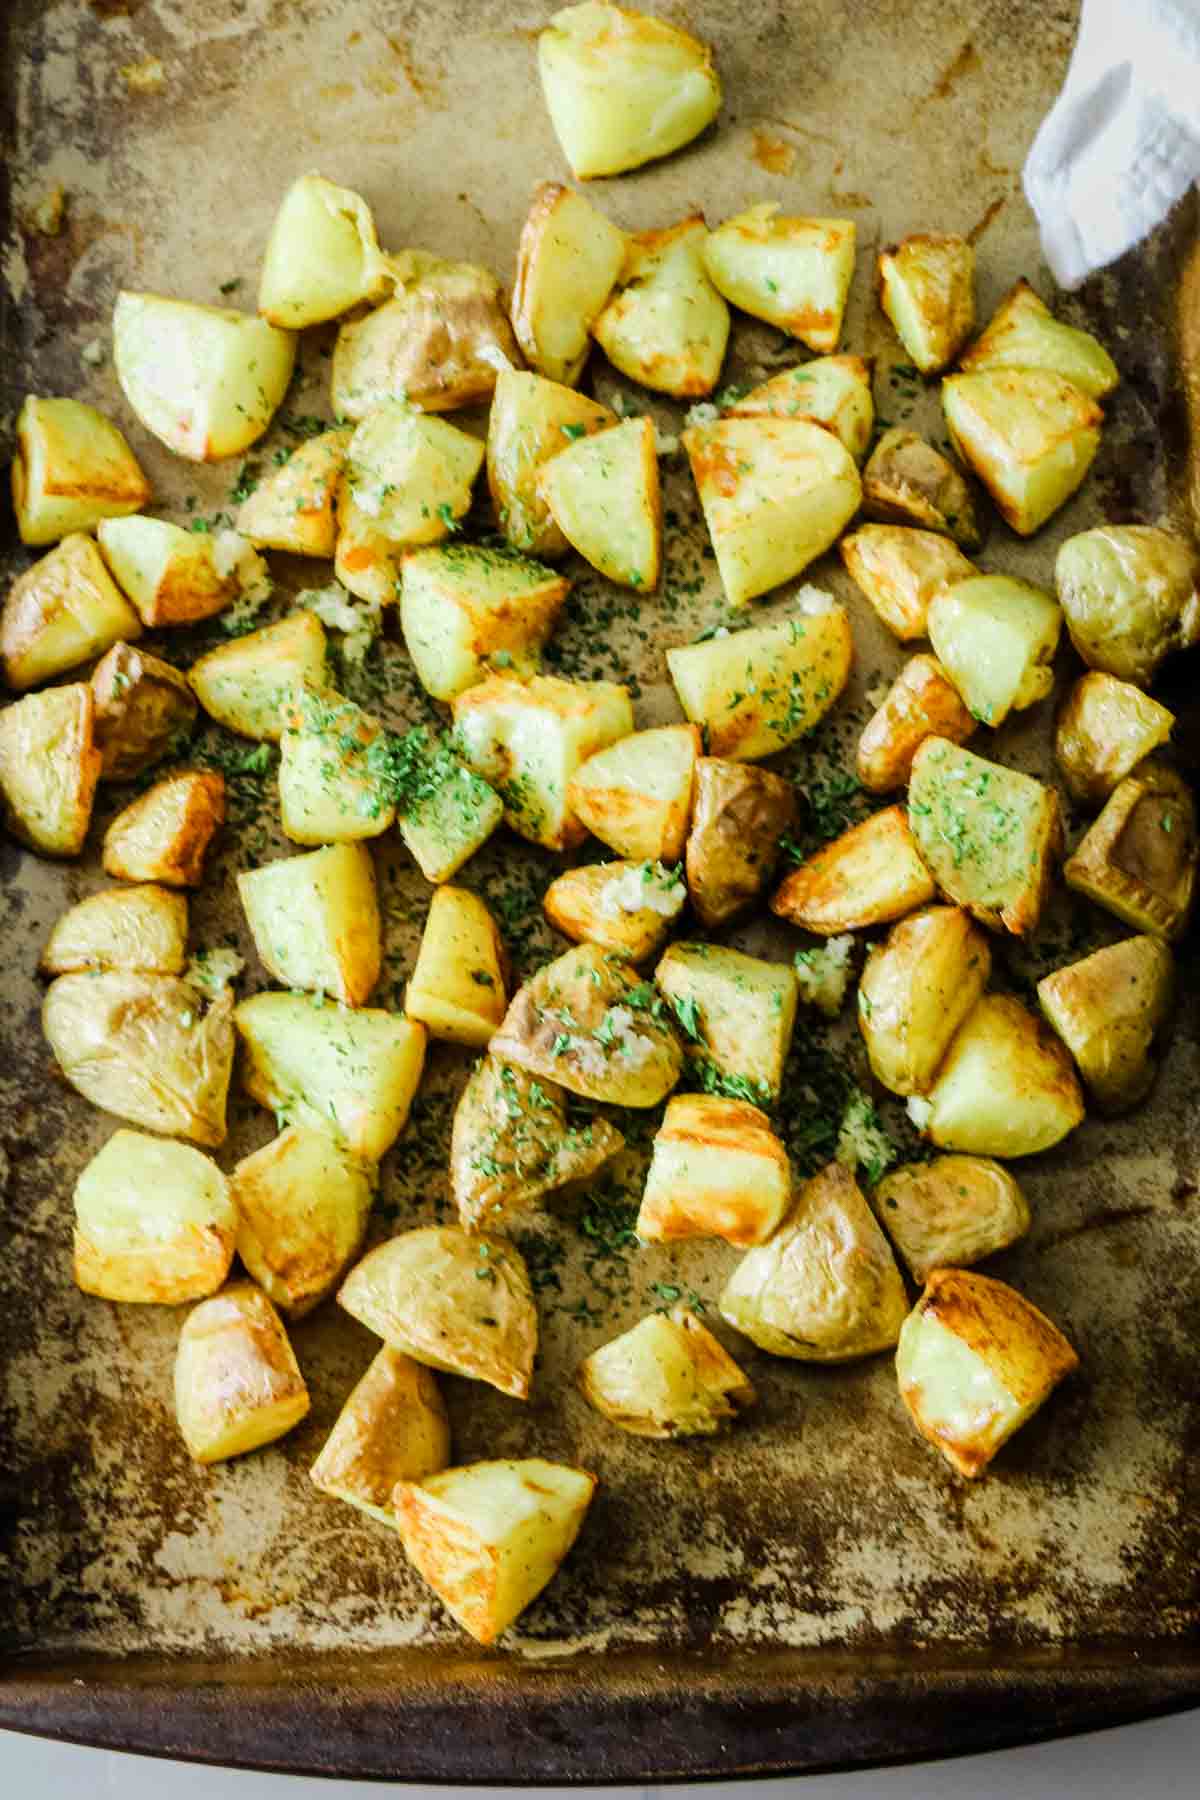 Add garlic and parsley to roasted potatoes.